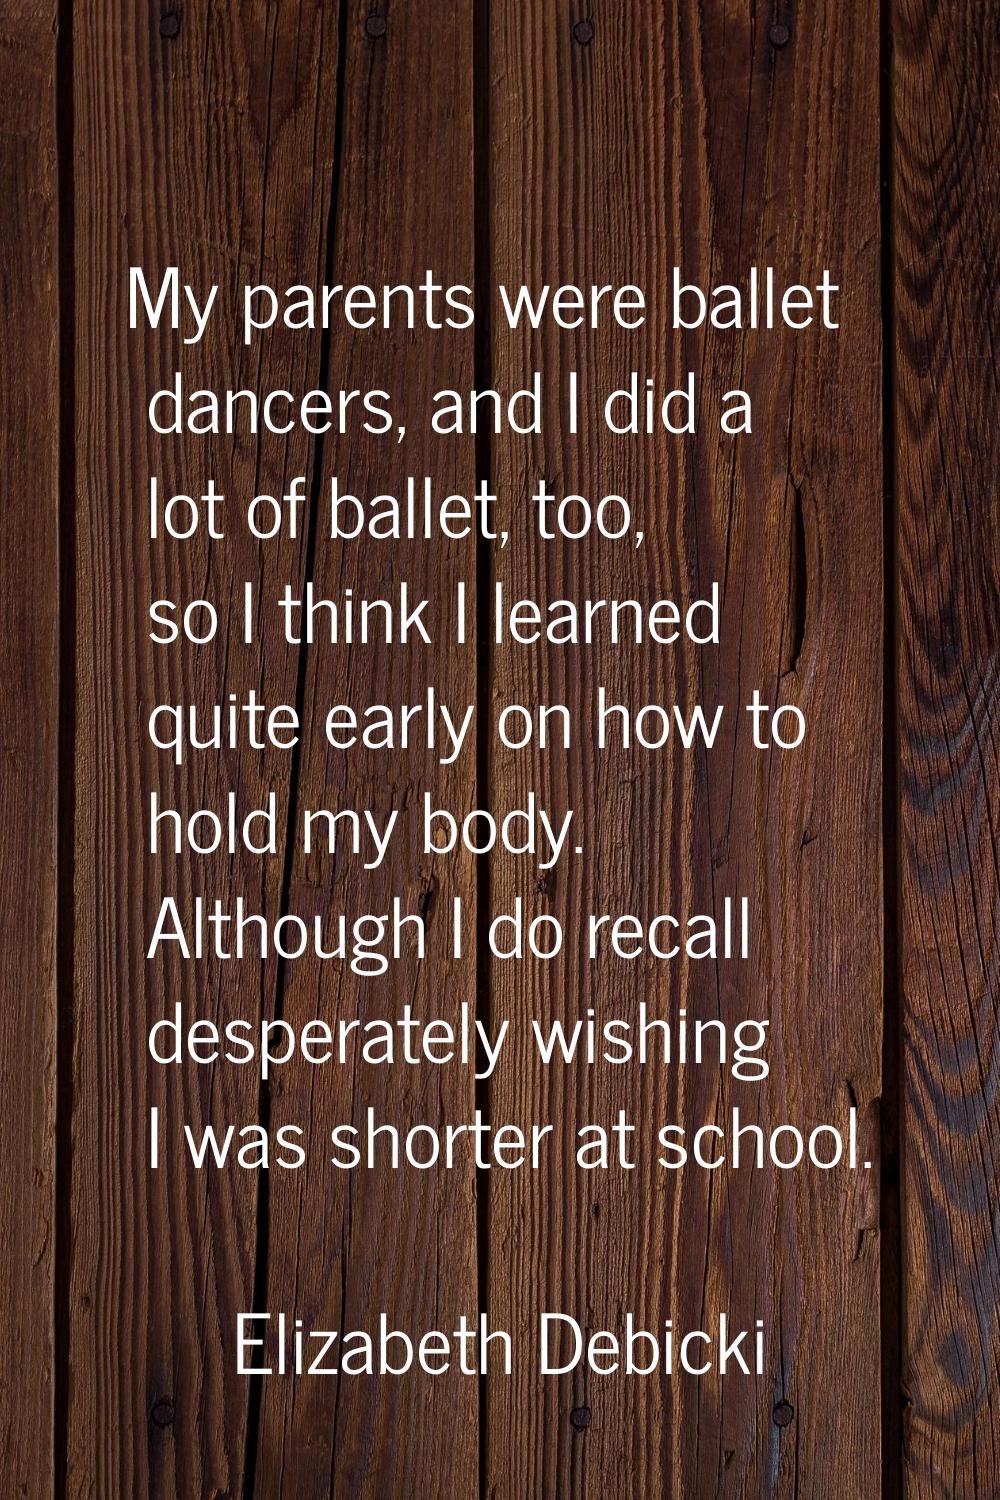 My parents were ballet dancers, and I did a lot of ballet, too, so I think I learned quite early on